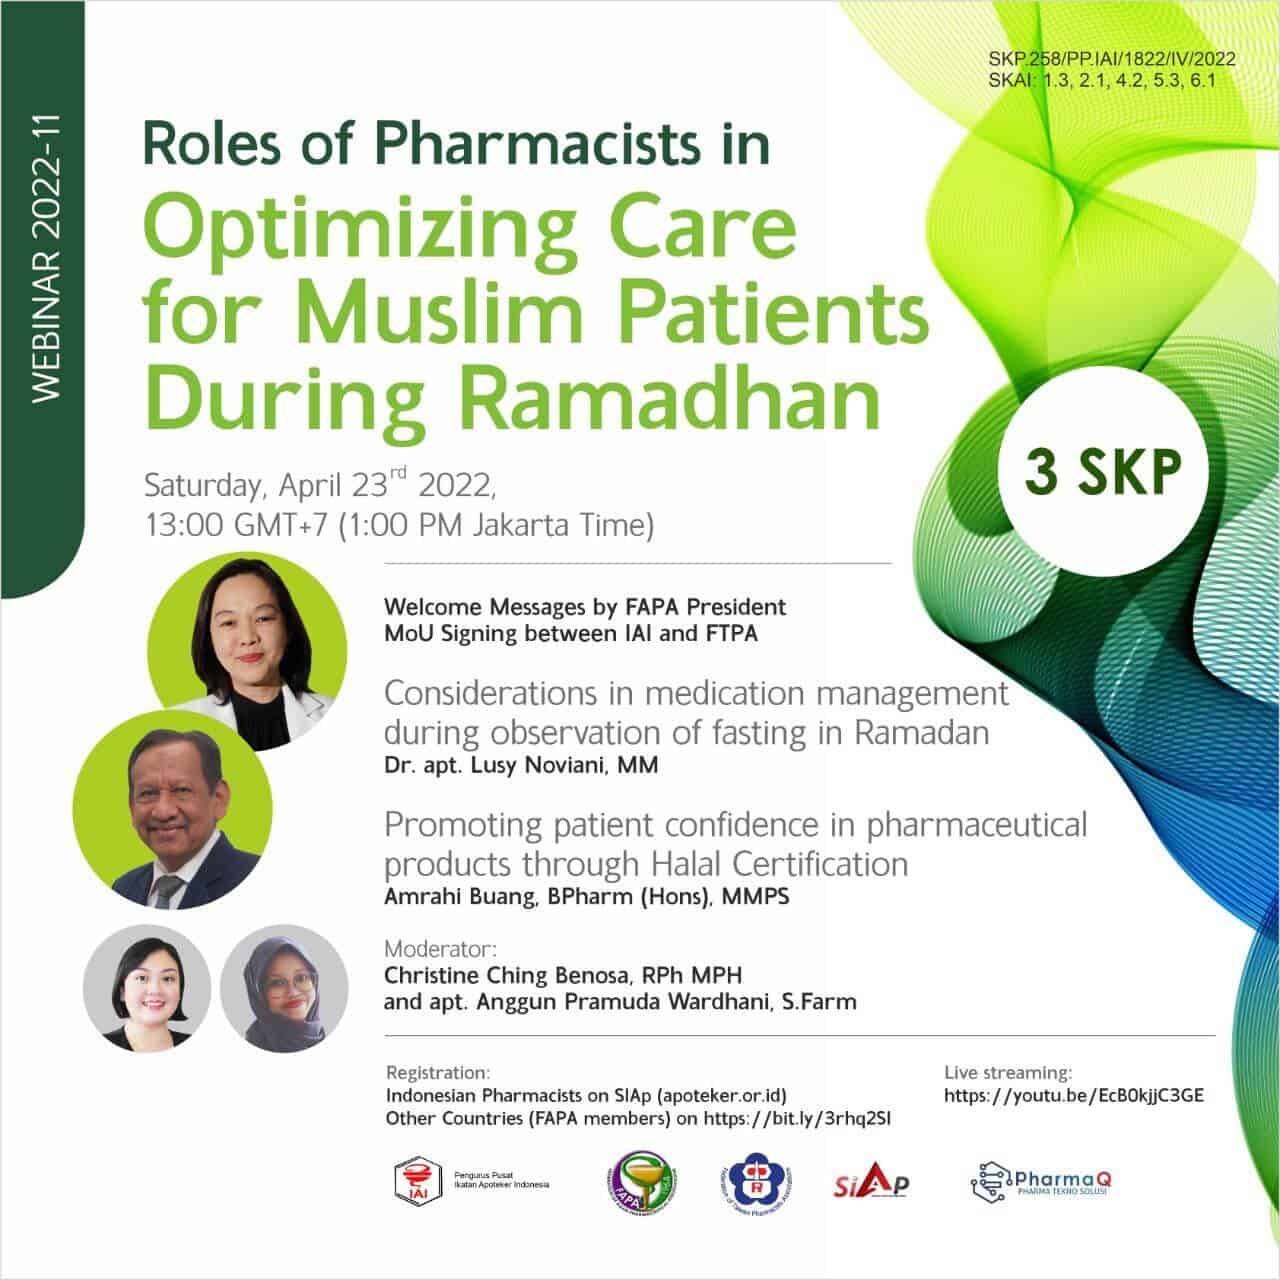 Roles of Pharmacists in Optimizing Care for Muslim Patients During Ramadhan